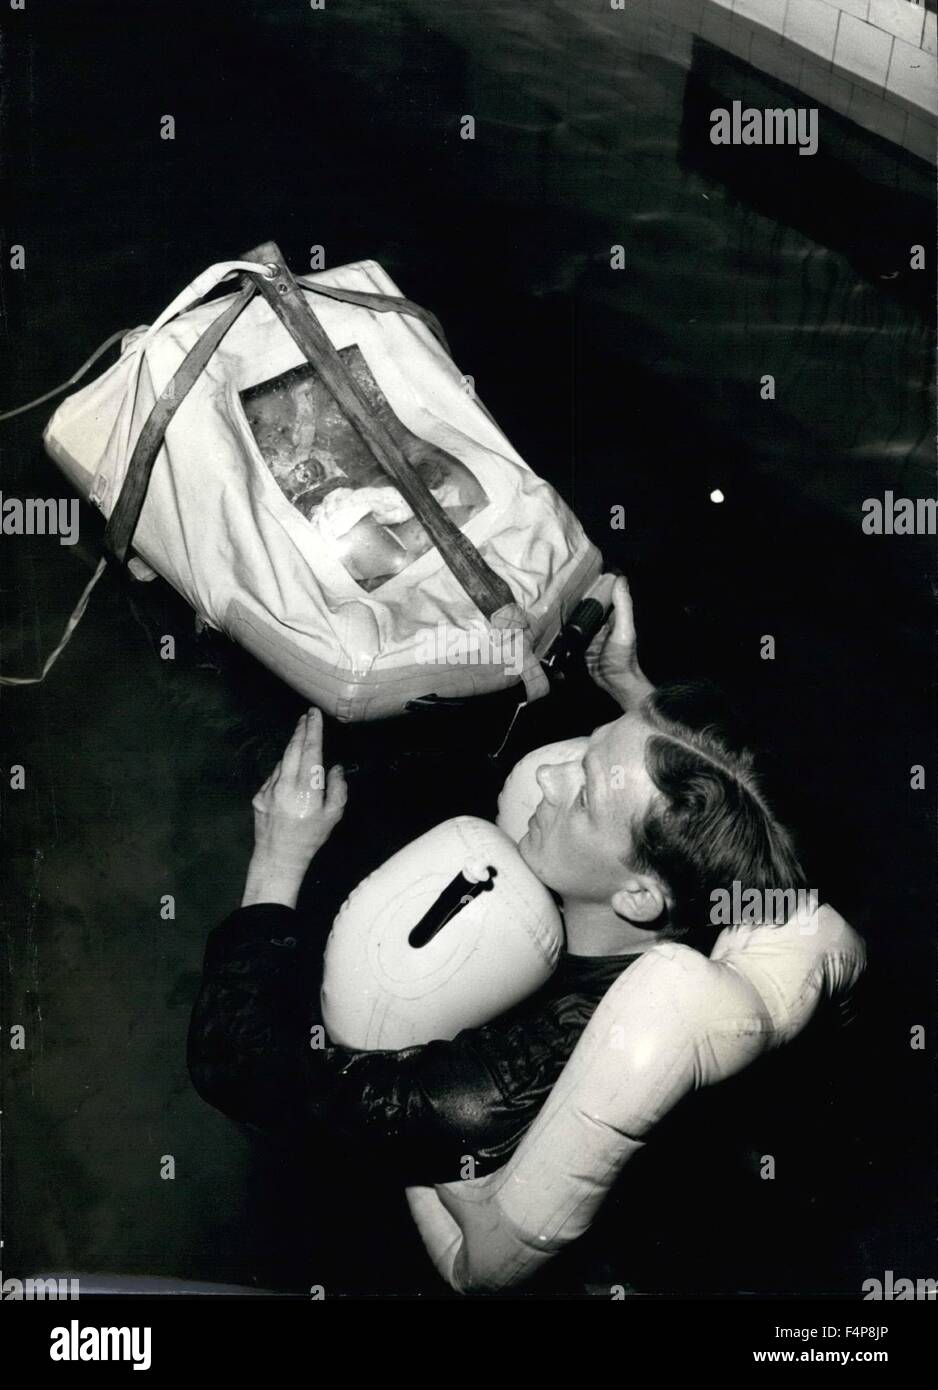 1965 - A baby boffin; Testing an Inflatable cot: Flt-Lieut. J. King of Farnborough, carrying out tests on the baby cot in which is his own daughter, Susan, aged 6 months. © Keystone Pictures USA/ZUMAPRESS.com/Alamy Live News Stock Photo